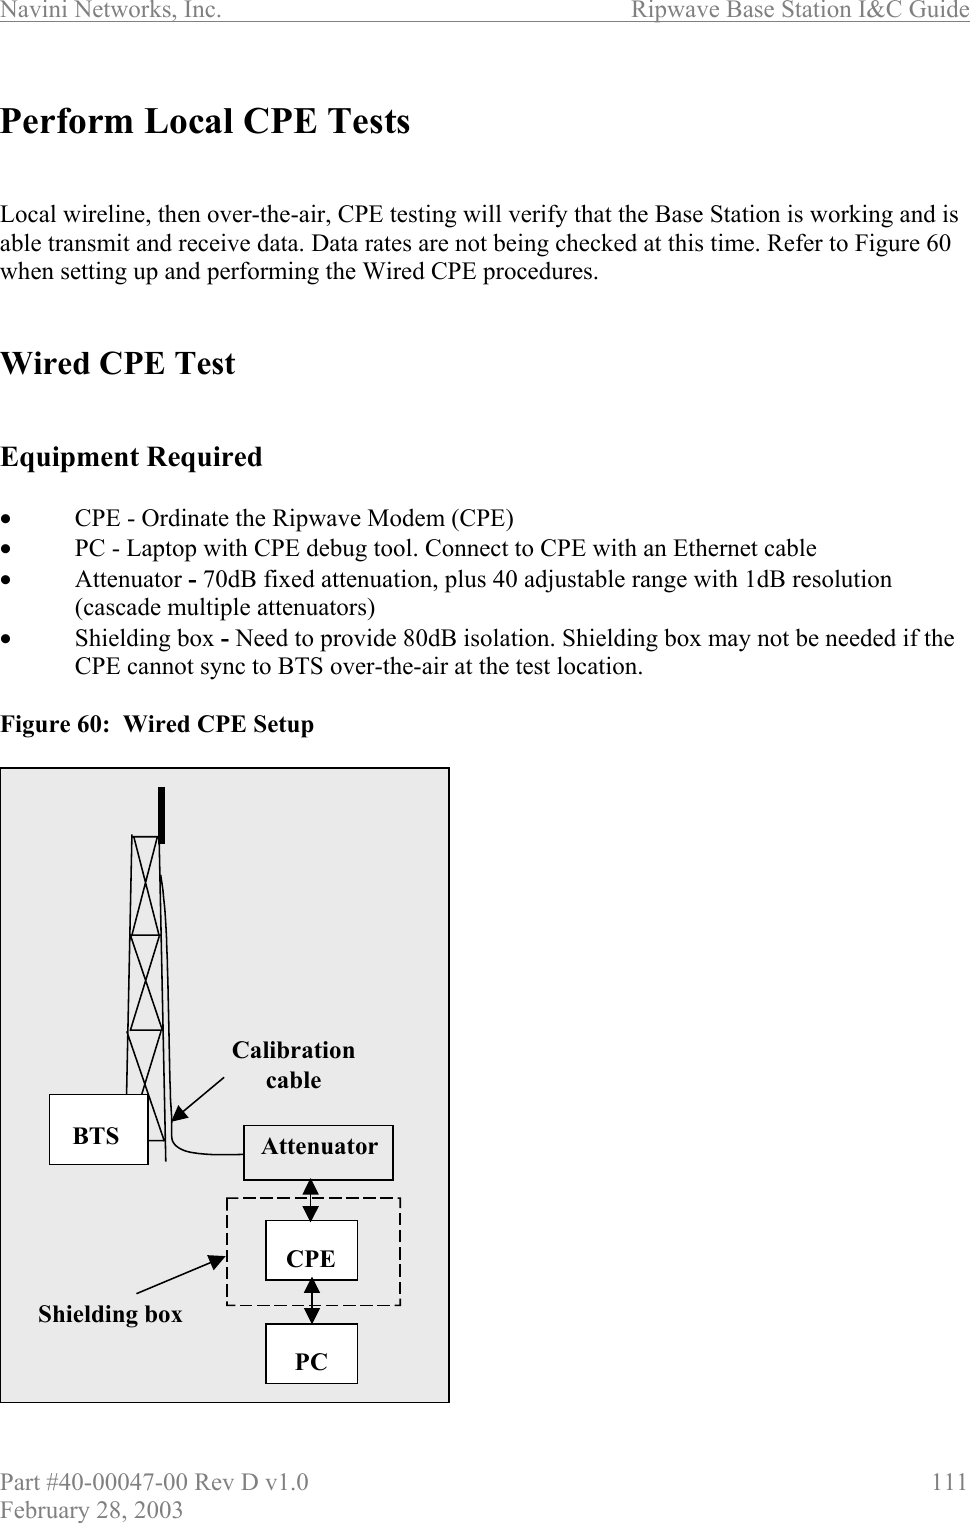 Navini Networks, Inc.                          Ripwave Base Station I&amp;C Guide Part #40-00047-00 Rev D v1.0                     111 February 28, 2003  Perform Local CPE Tests   Local wireline, then over-the-air, CPE testing will verify that the Base Station is working and is able transmit and receive data. Data rates are not being checked at this time. Refer to Figure 60 when setting up and performing the Wired CPE procedures.   Wired CPE Test   Equipment Required  •  CPE - Ordinate the Ripwave Modem (CPE) •  PC - Laptop with CPE debug tool. Connect to CPE with an Ethernet cable •  Attenuator - 70dB fixed attenuation, plus 40 adjustable range with 1dB resolution (cascade multiple attenuators) •  Shielding box - Need to provide 80dB isolation. Shielding box may not be needed if the CPE cannot sync to BTS over-the-air at the test location.   Figure 60:  Wired CPE Setup                       CPEPCAttenuatorShielding boxBTSCalibration cableCPEPCAttenuatorShielding boxBTSCalibration cable